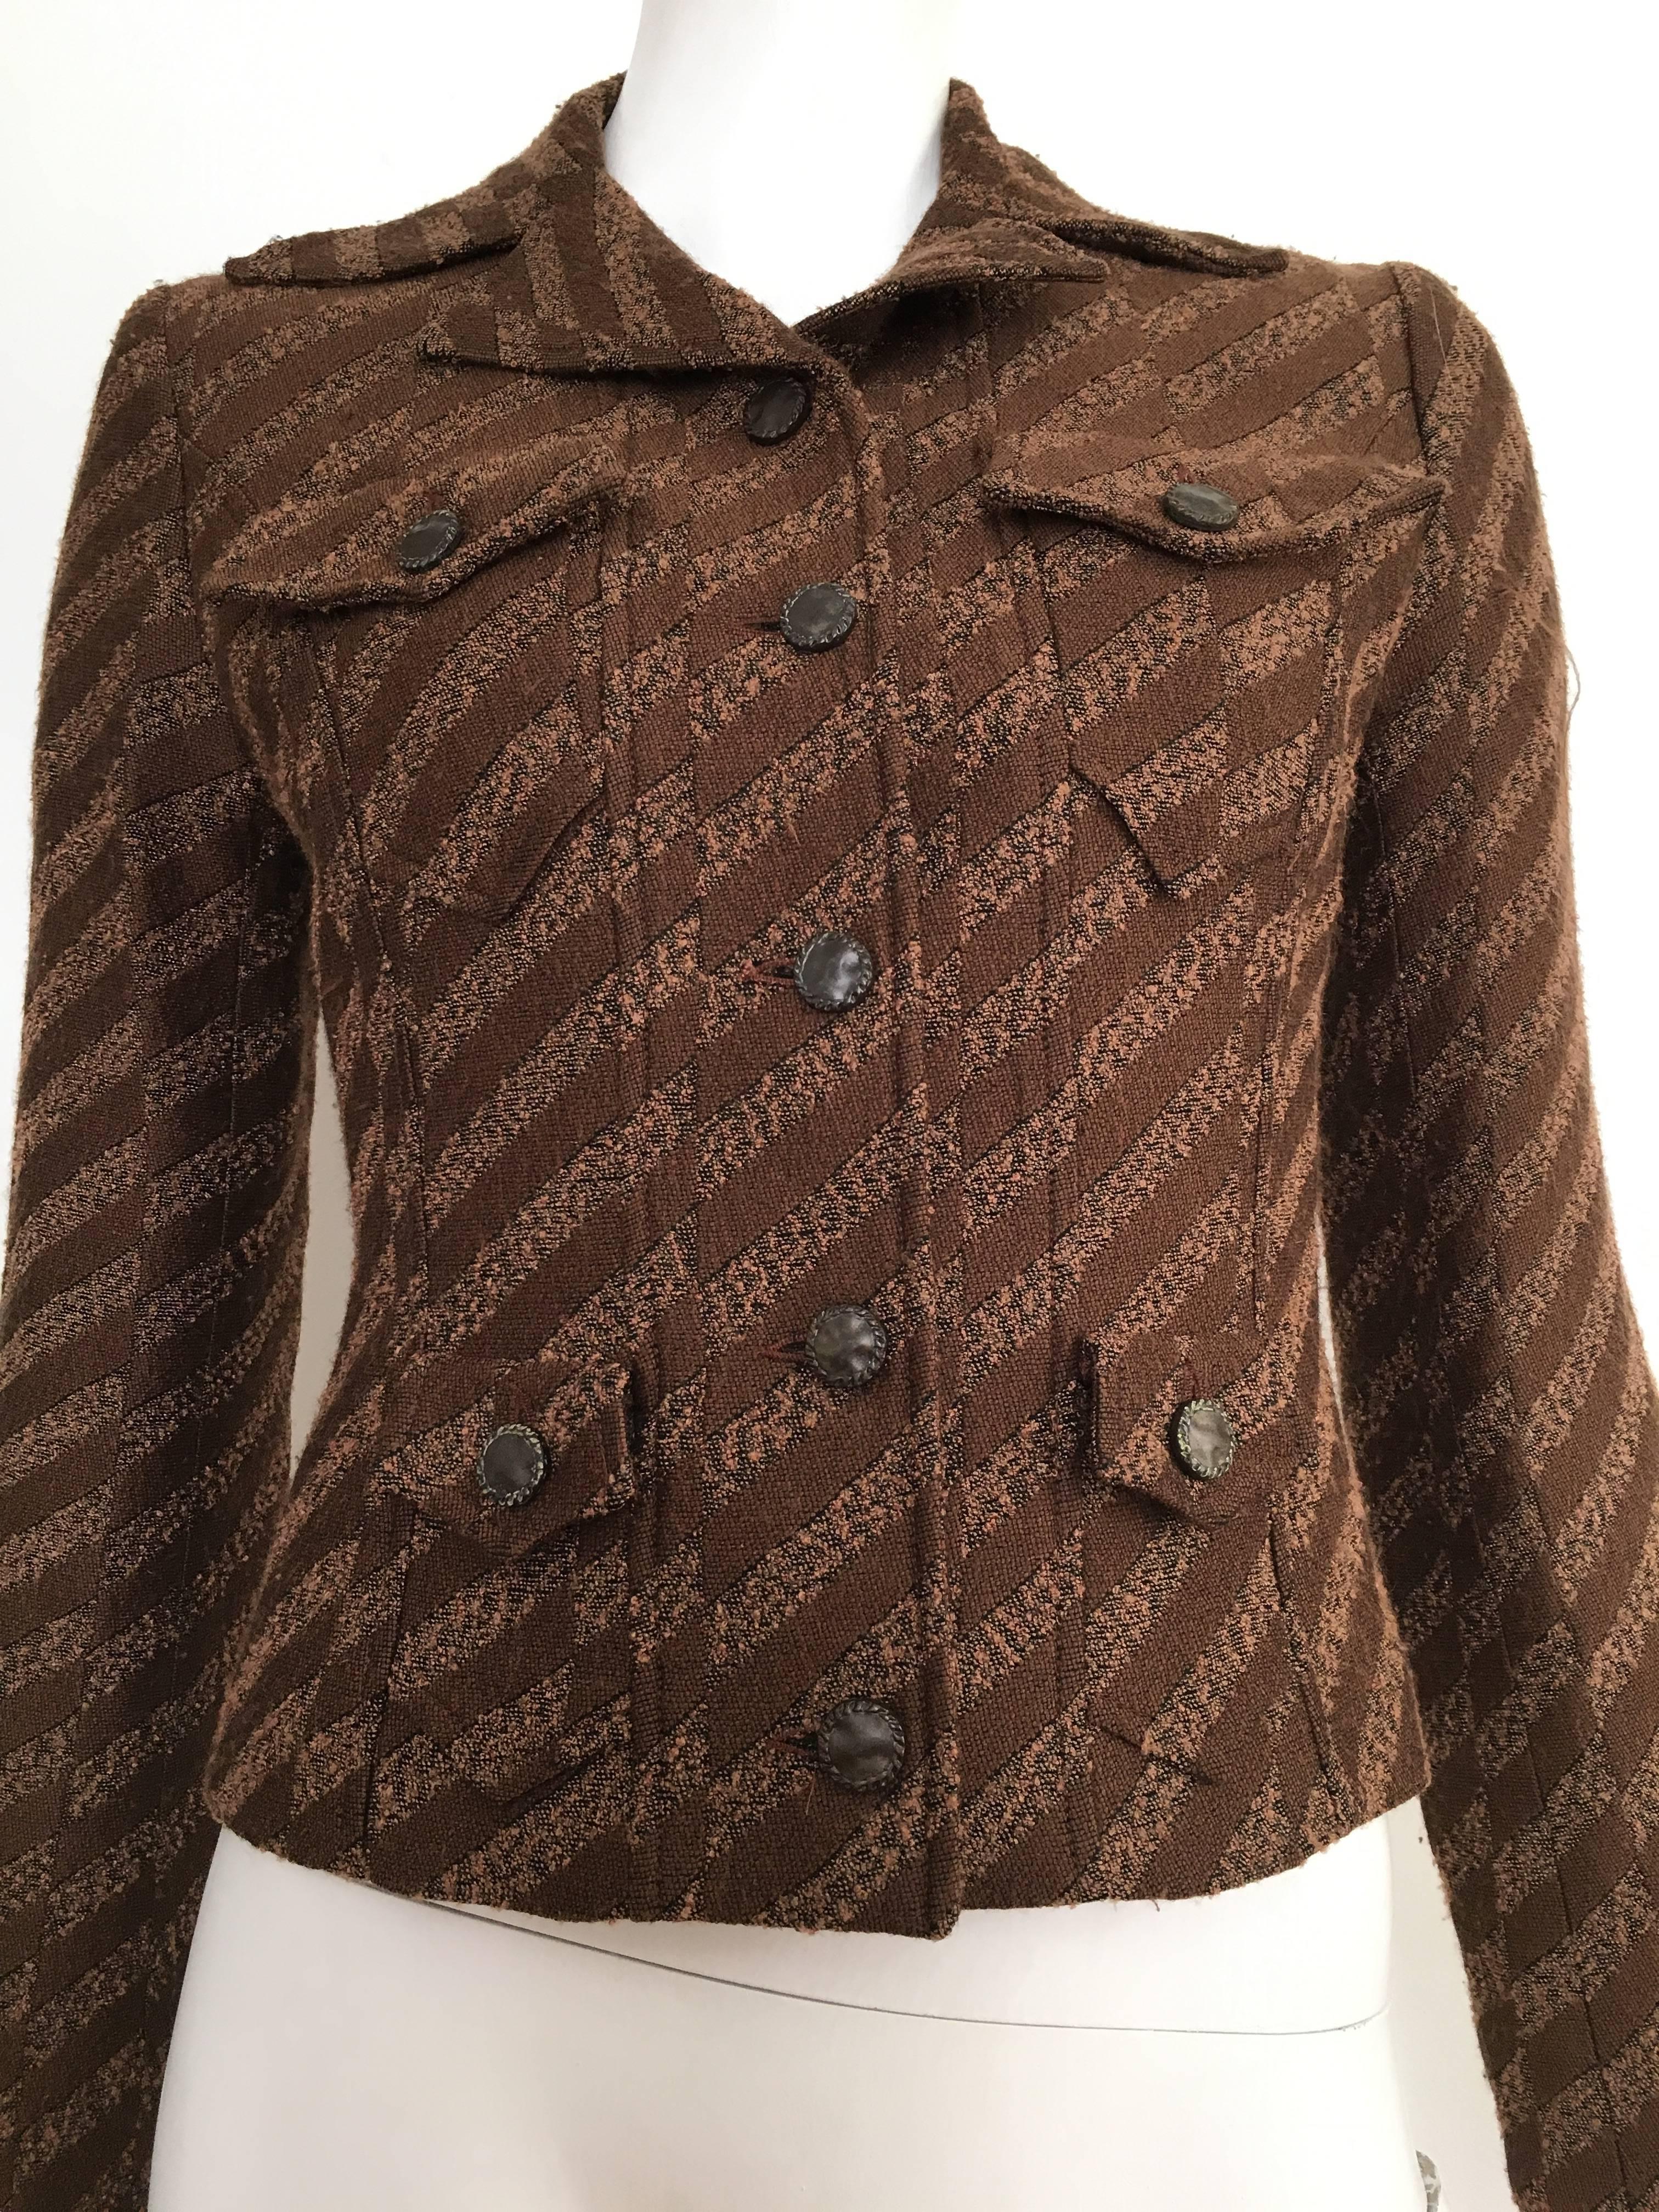 Christian Lacroix 1990s cropped brown jacket is a French size 34 and fits like an USA size 4.  Ladies please grab your tape measure so you can properly measure your bust-line to see if this piece will properly fit your lovely body.  It fits Matilda